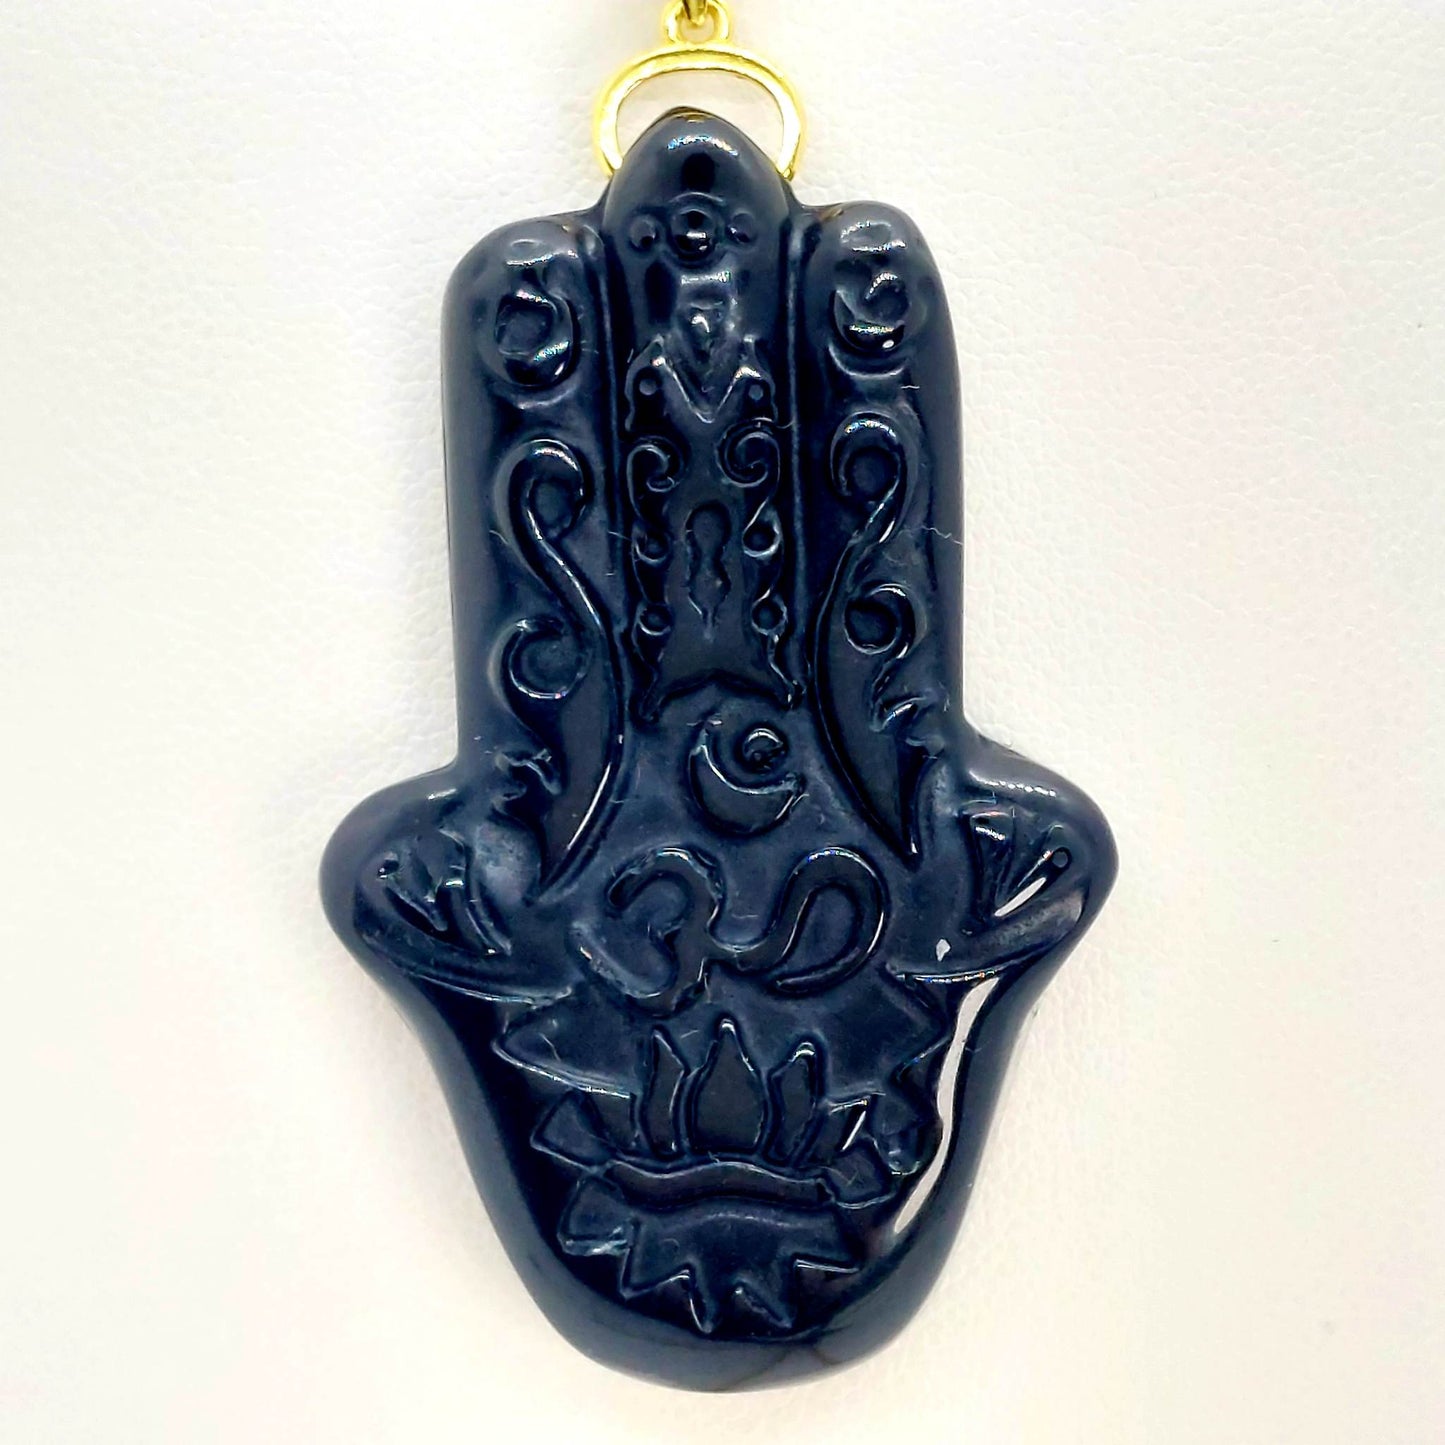 Natural Obsidian Hand of Fatima Pendant - Stainless Steel Gold Plated Chain Necklace